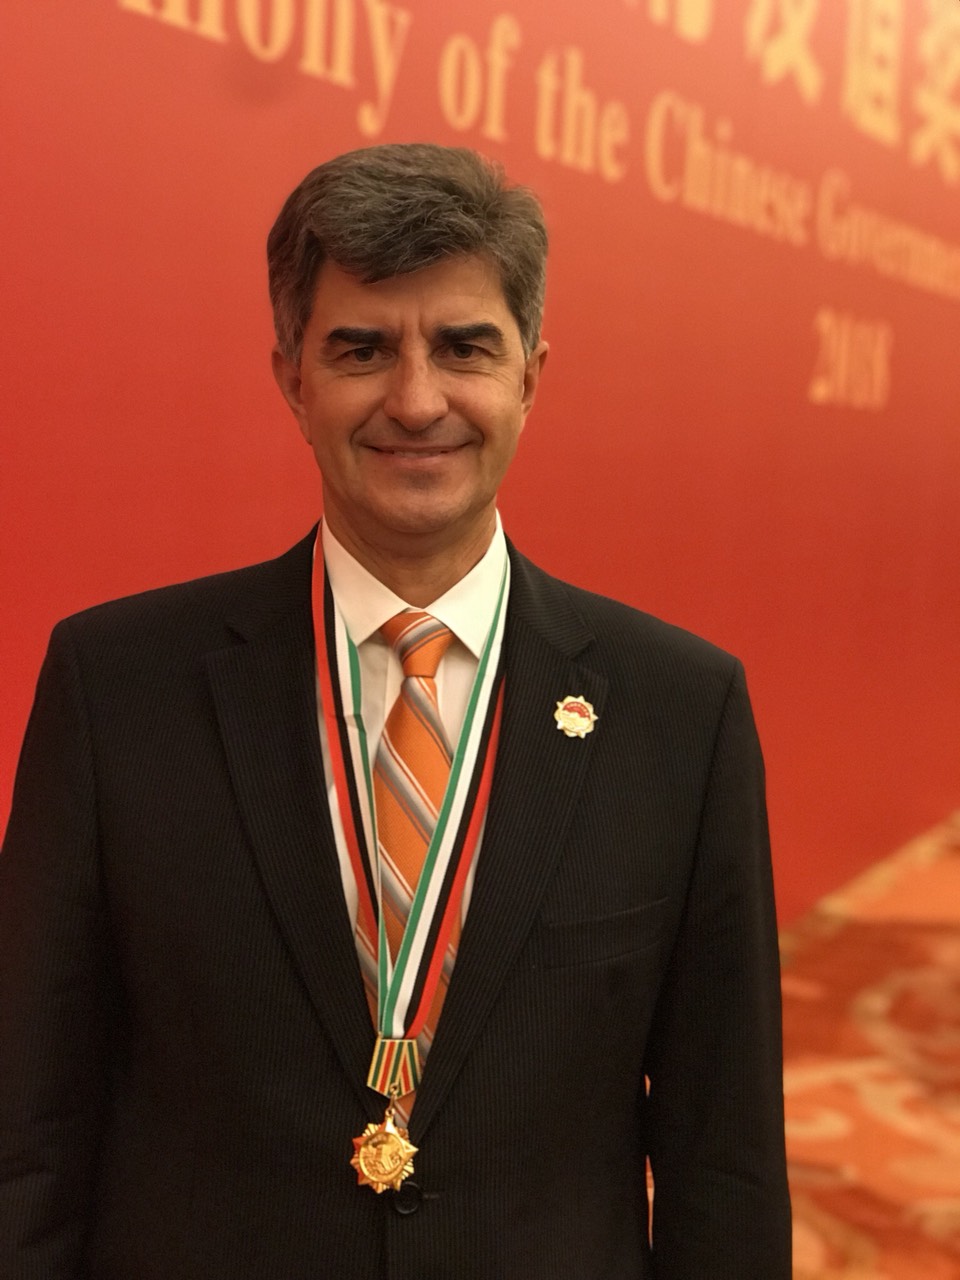 Congratulations to Professor Yury Gogotsi with receiving prestigious Chineese Government Friendship Award, Beijing, in Great Hall of the People, on September 29, 2018.